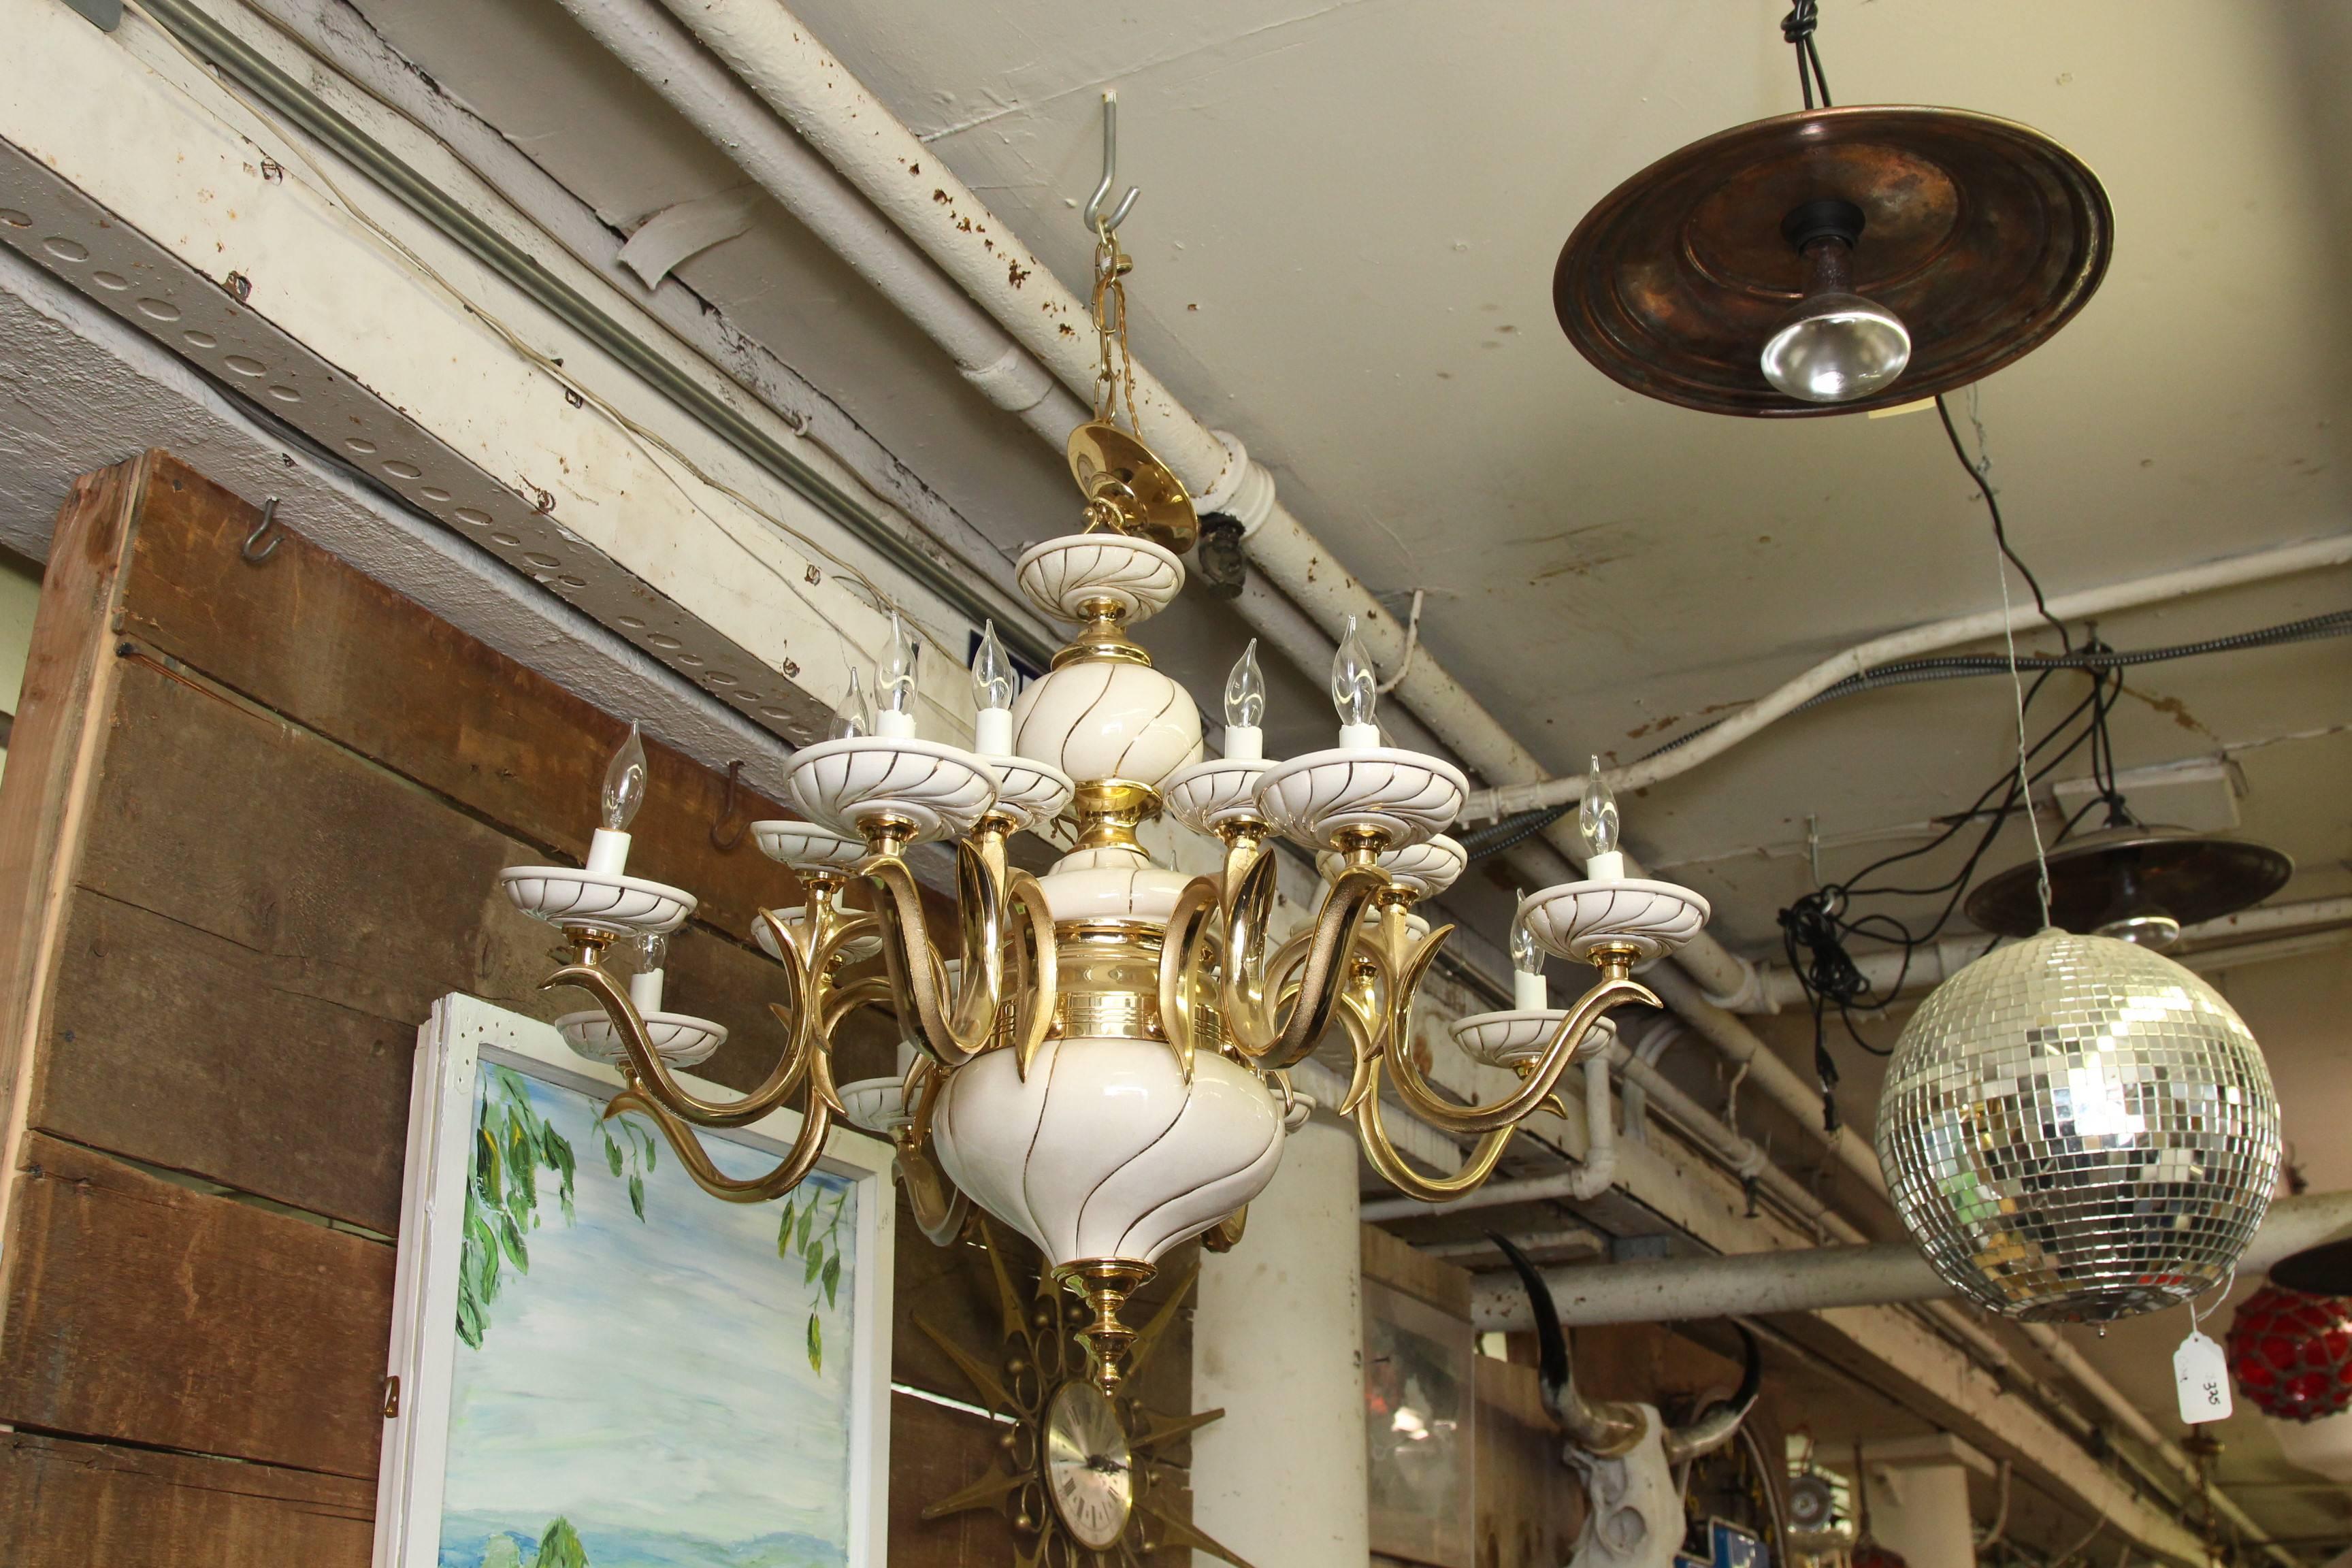 1960s Italian white porcelain and brass sixteen-light eight-arm chandelier. Beefy yet elegant brass chandelier with porcelain bobeches and centrepieces. This item can be viewed at our 400 Gilligan location in Scranton, PA.